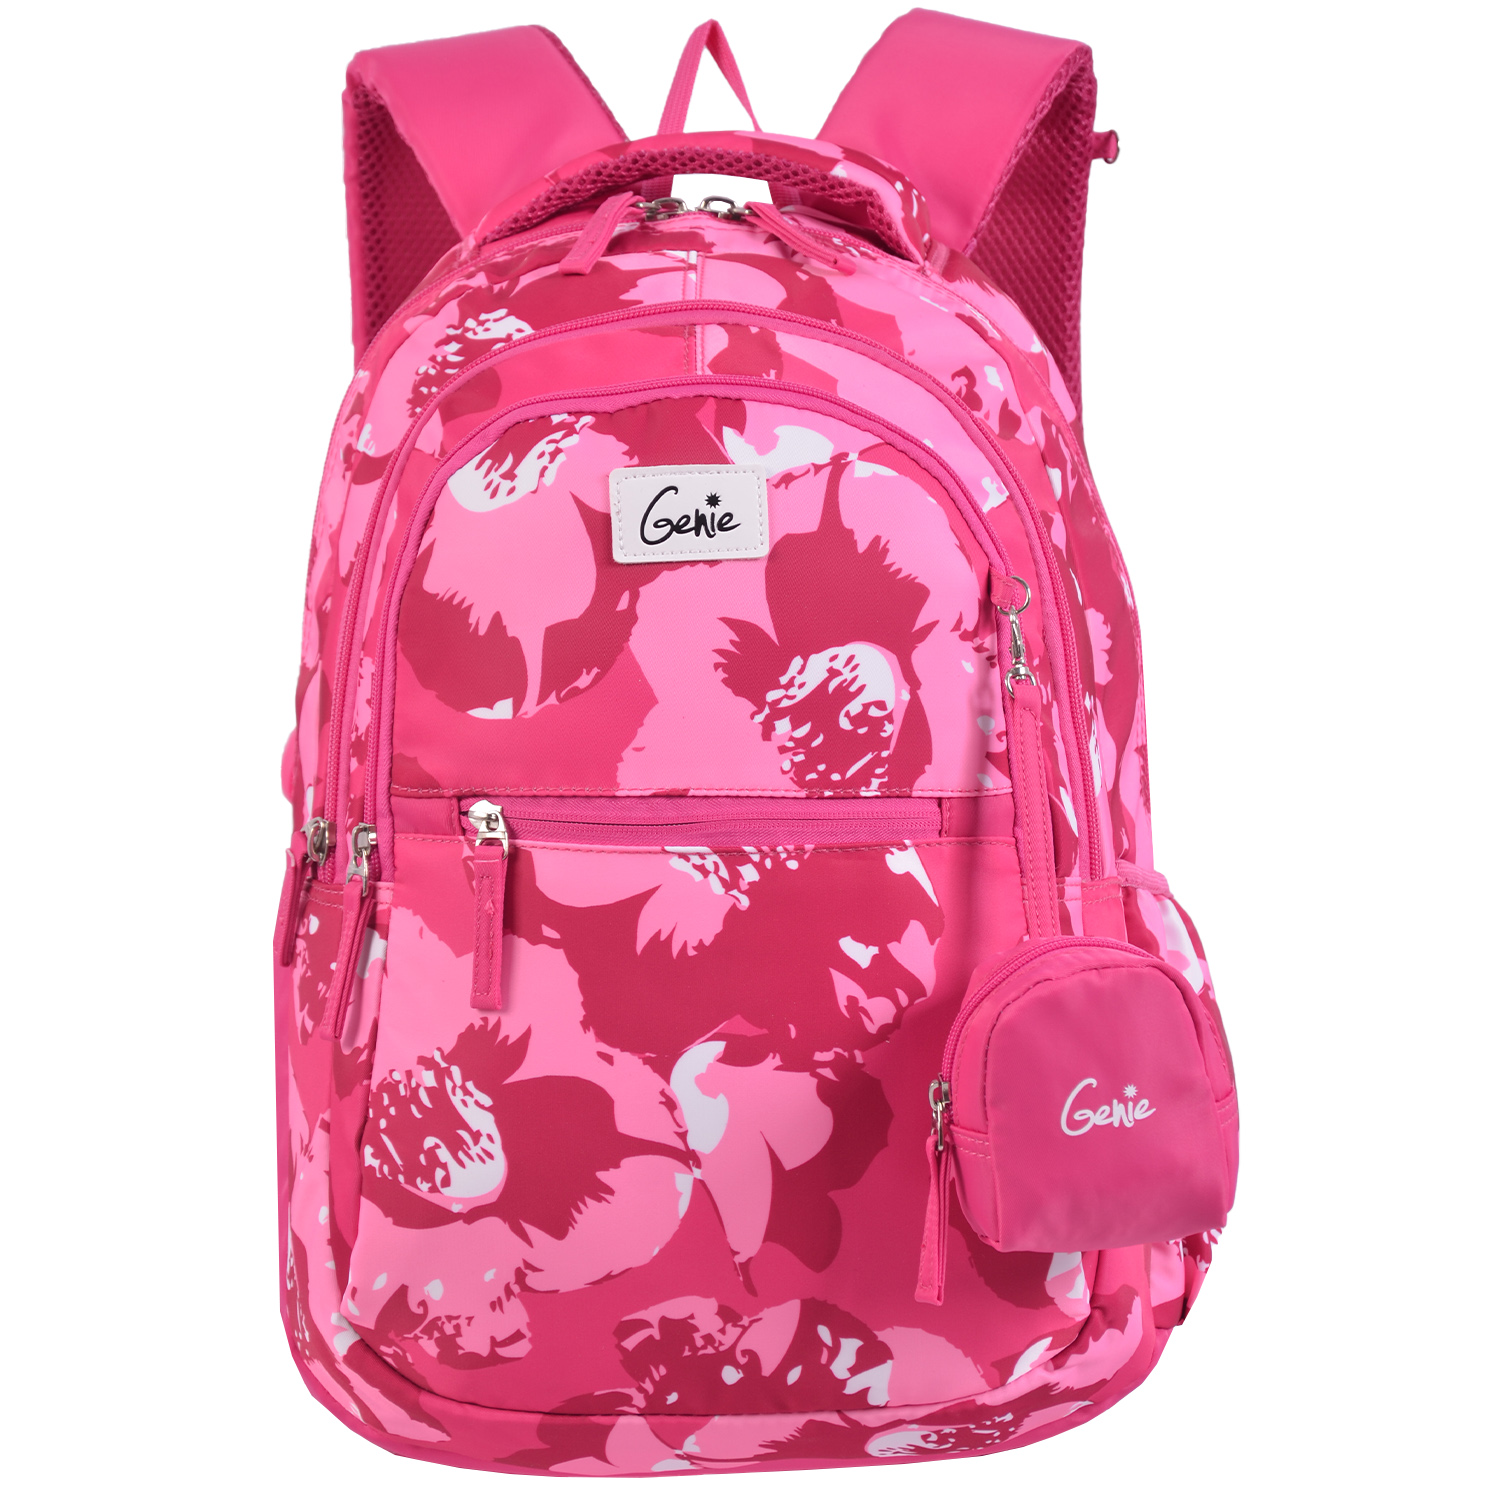 RoshanBags_GENIE 28L KIDS BACKPACK BLOOM 17 PINK WITH POUCH